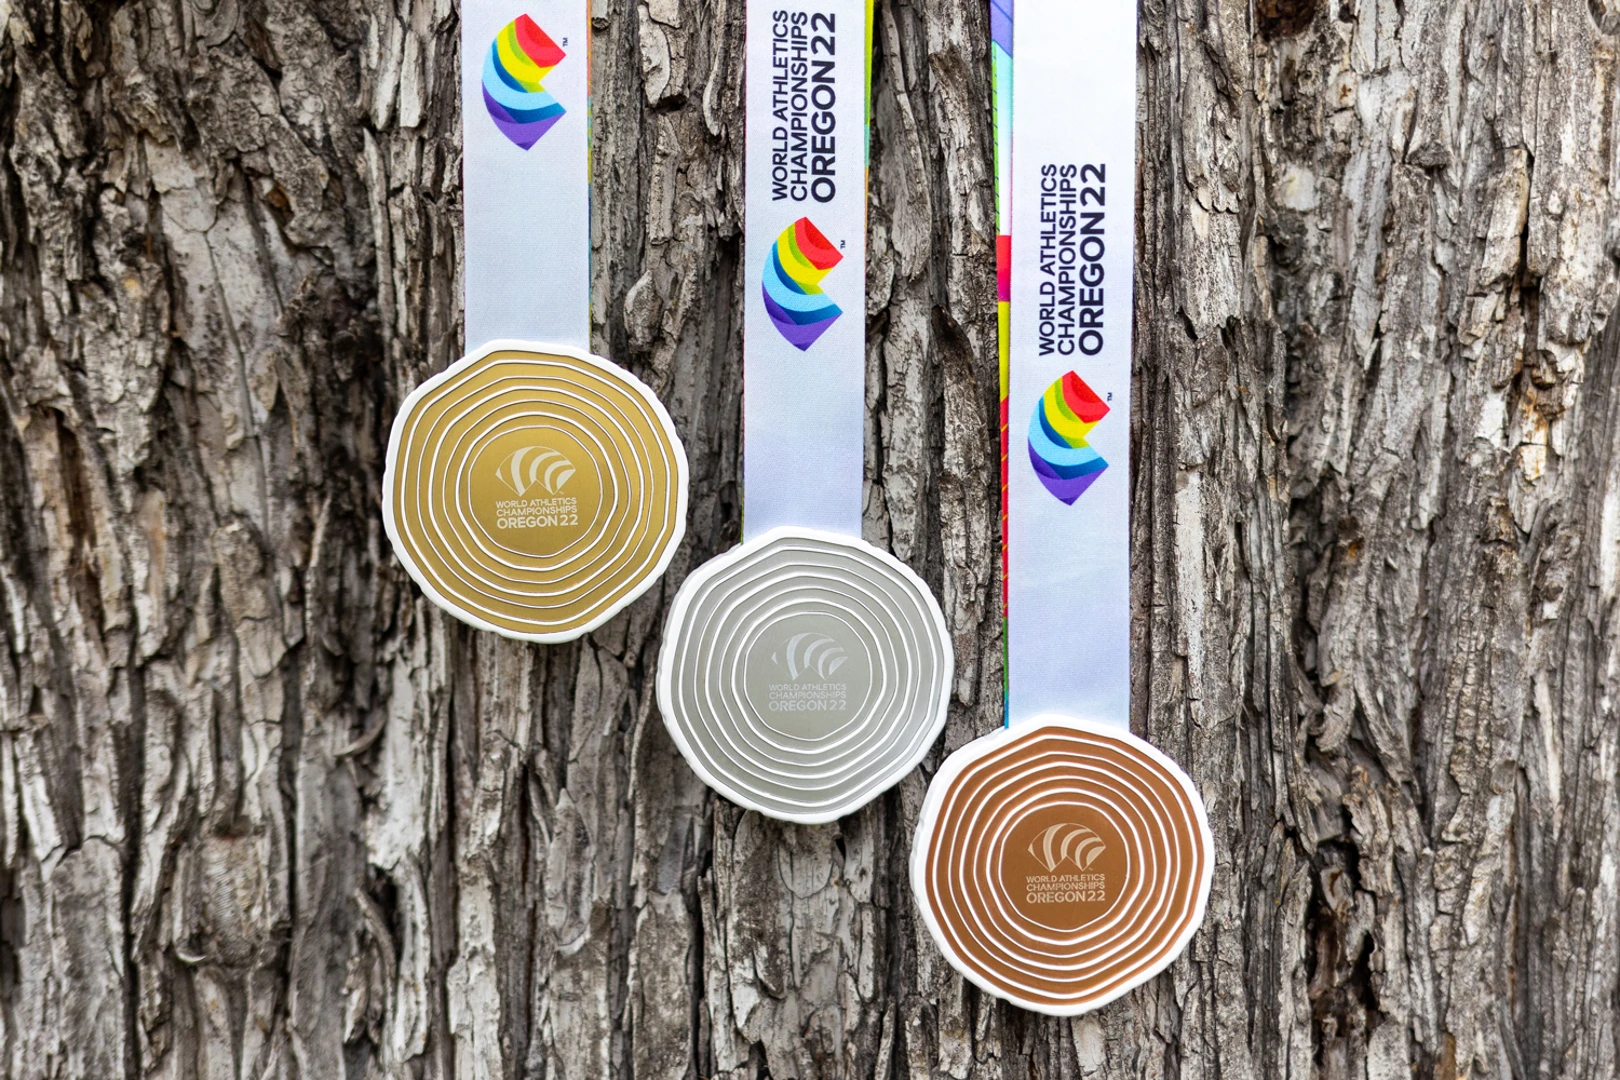 Medals revealed in celebration of 10 days to go until the World Athletics Championships 2022